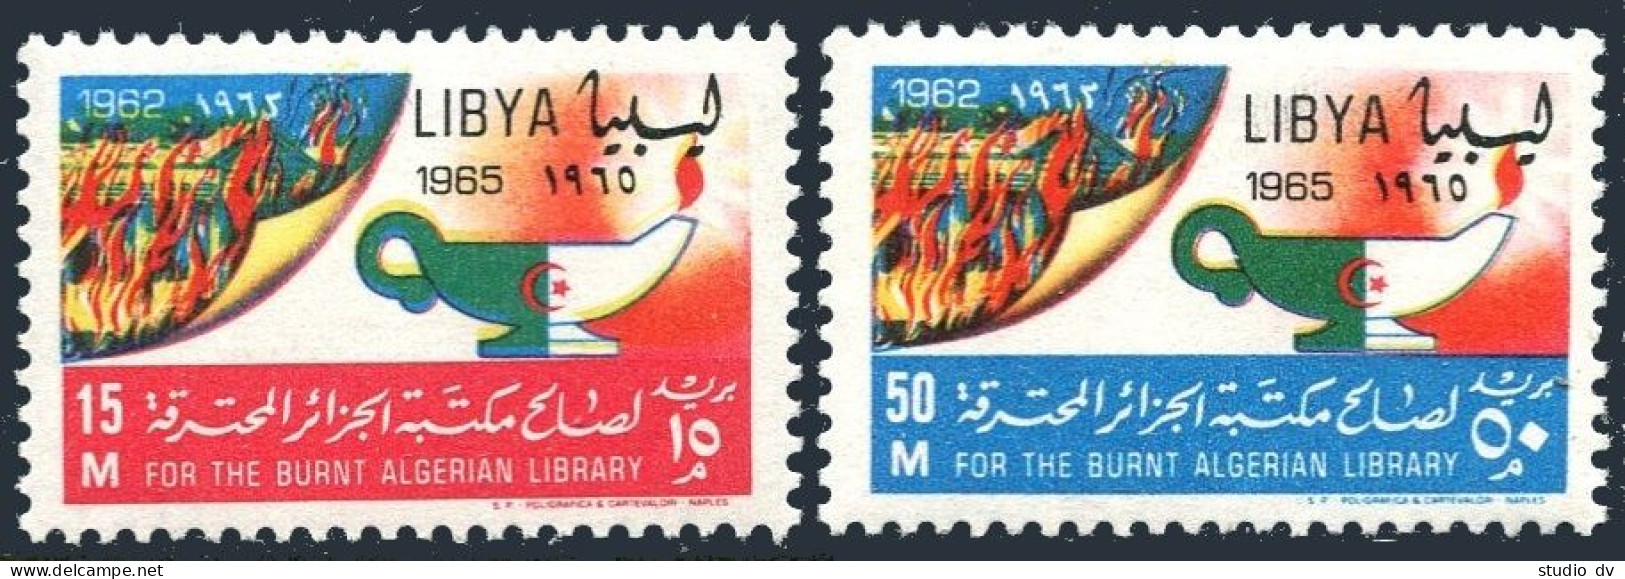 Libya 282-283, MNH. Michel 191-192. Burning Of The Library Of Algiers, 1964. - Libye